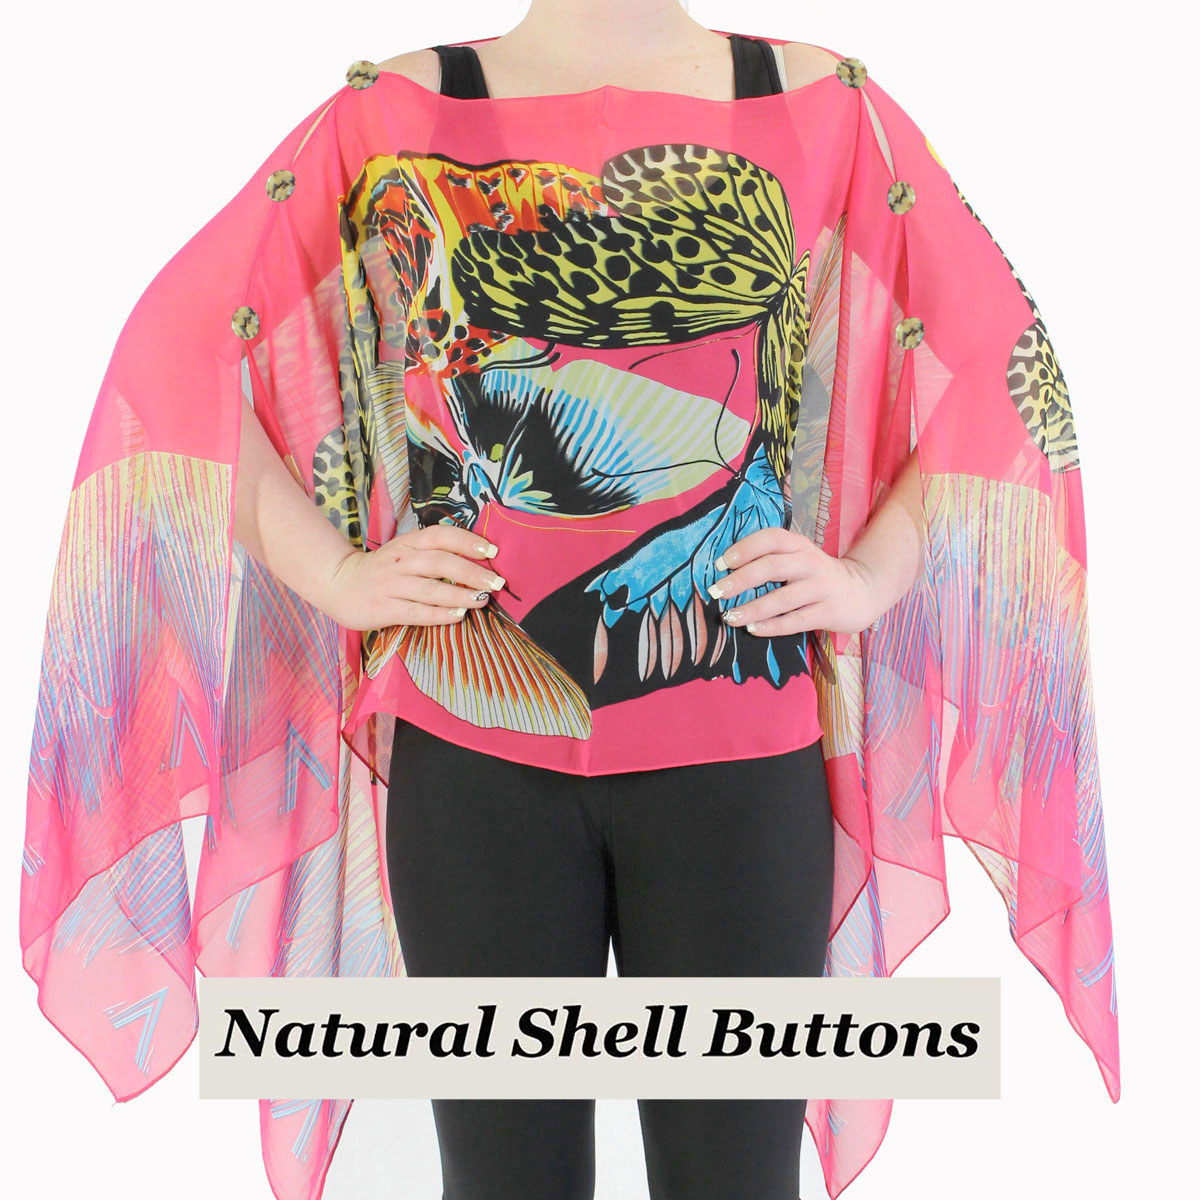 1799 - Silky Six Button Poncho/Cape 714OR - Shell Buttons<br>
Orange Big Butterfly  - 